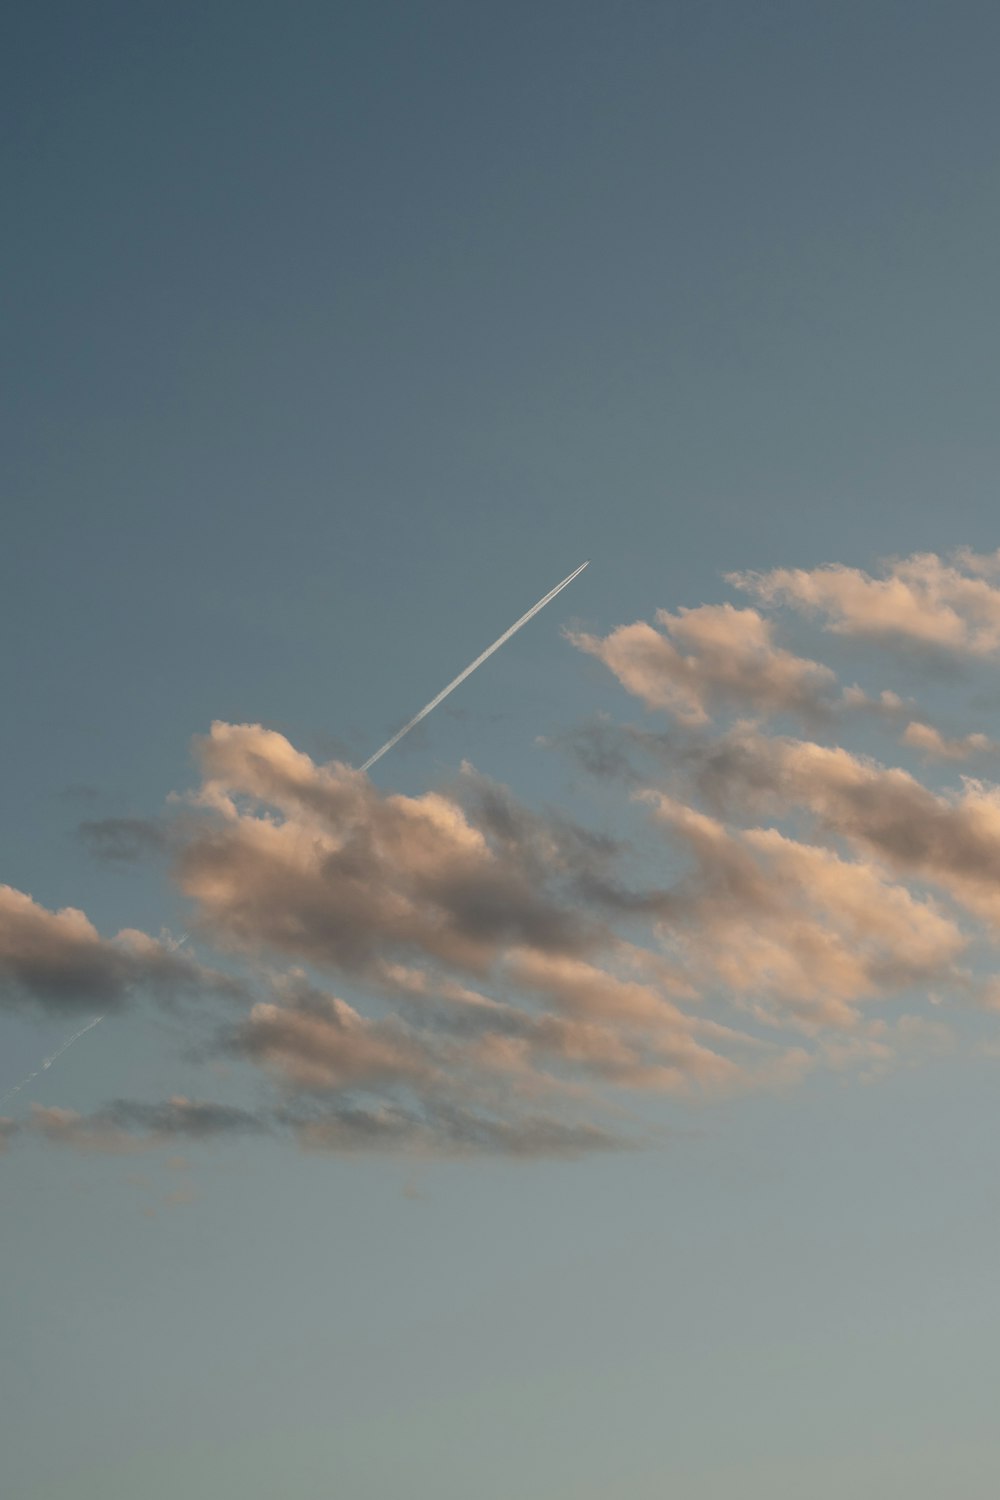 a plane flying in the sky with a contrail in the background